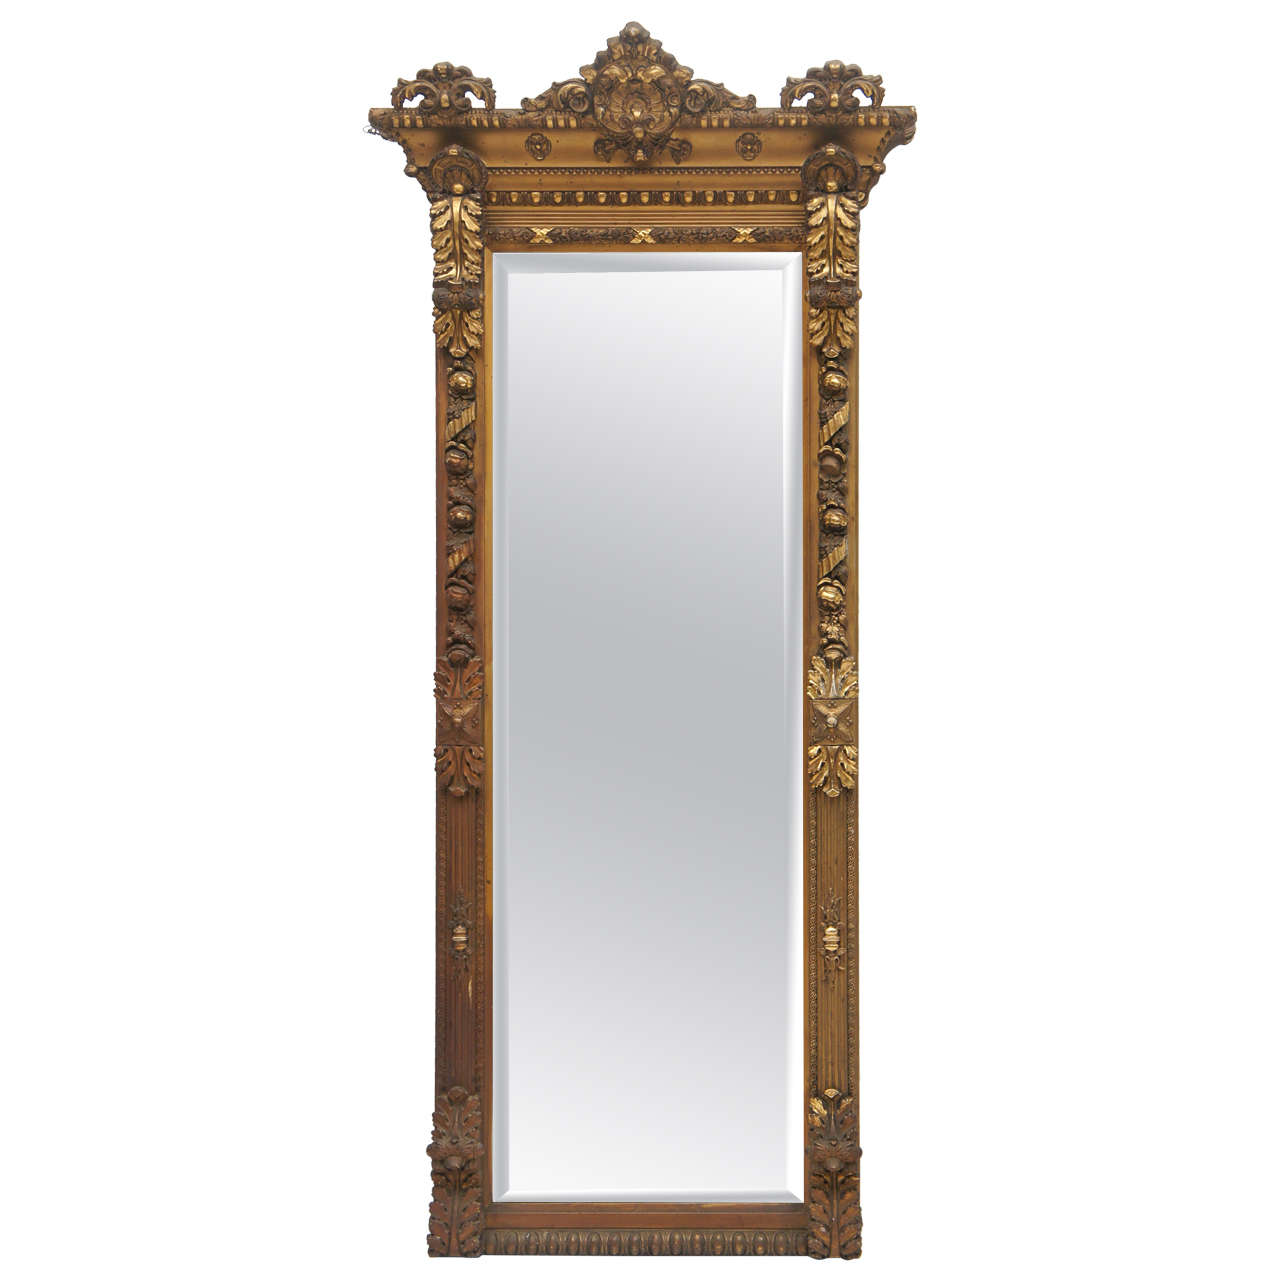 1800's long gold gilded floor or mantle mirror